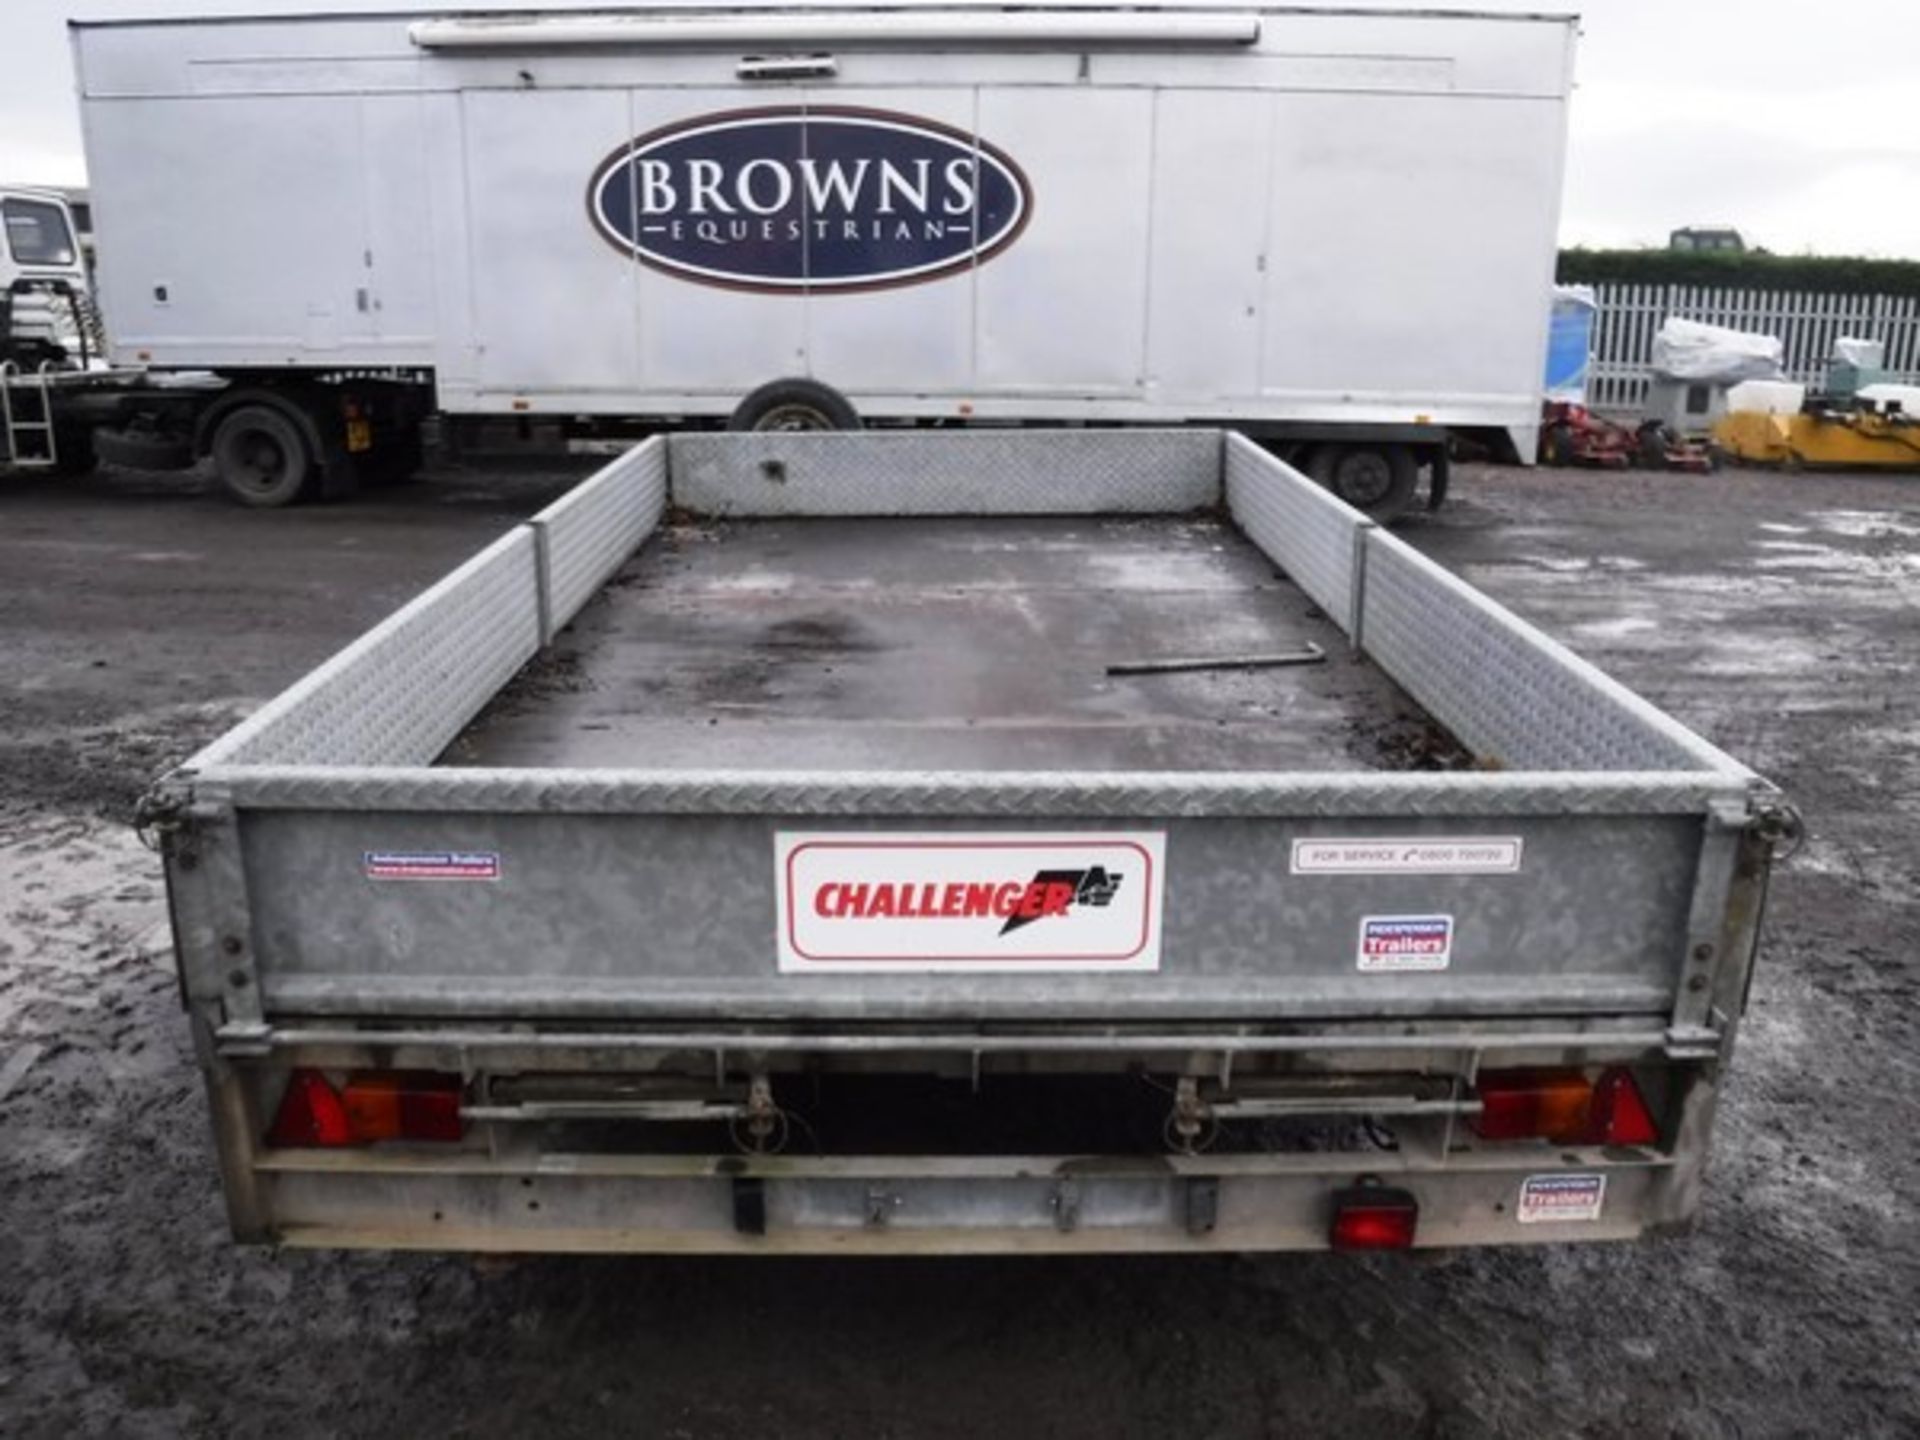 INDESPENSION CHALLANGER 12' X 6' TWIN AXLE DROPSIDE TRAILER. VIN G-056177. ASSEST NO. 758-1316 - Image 4 of 6